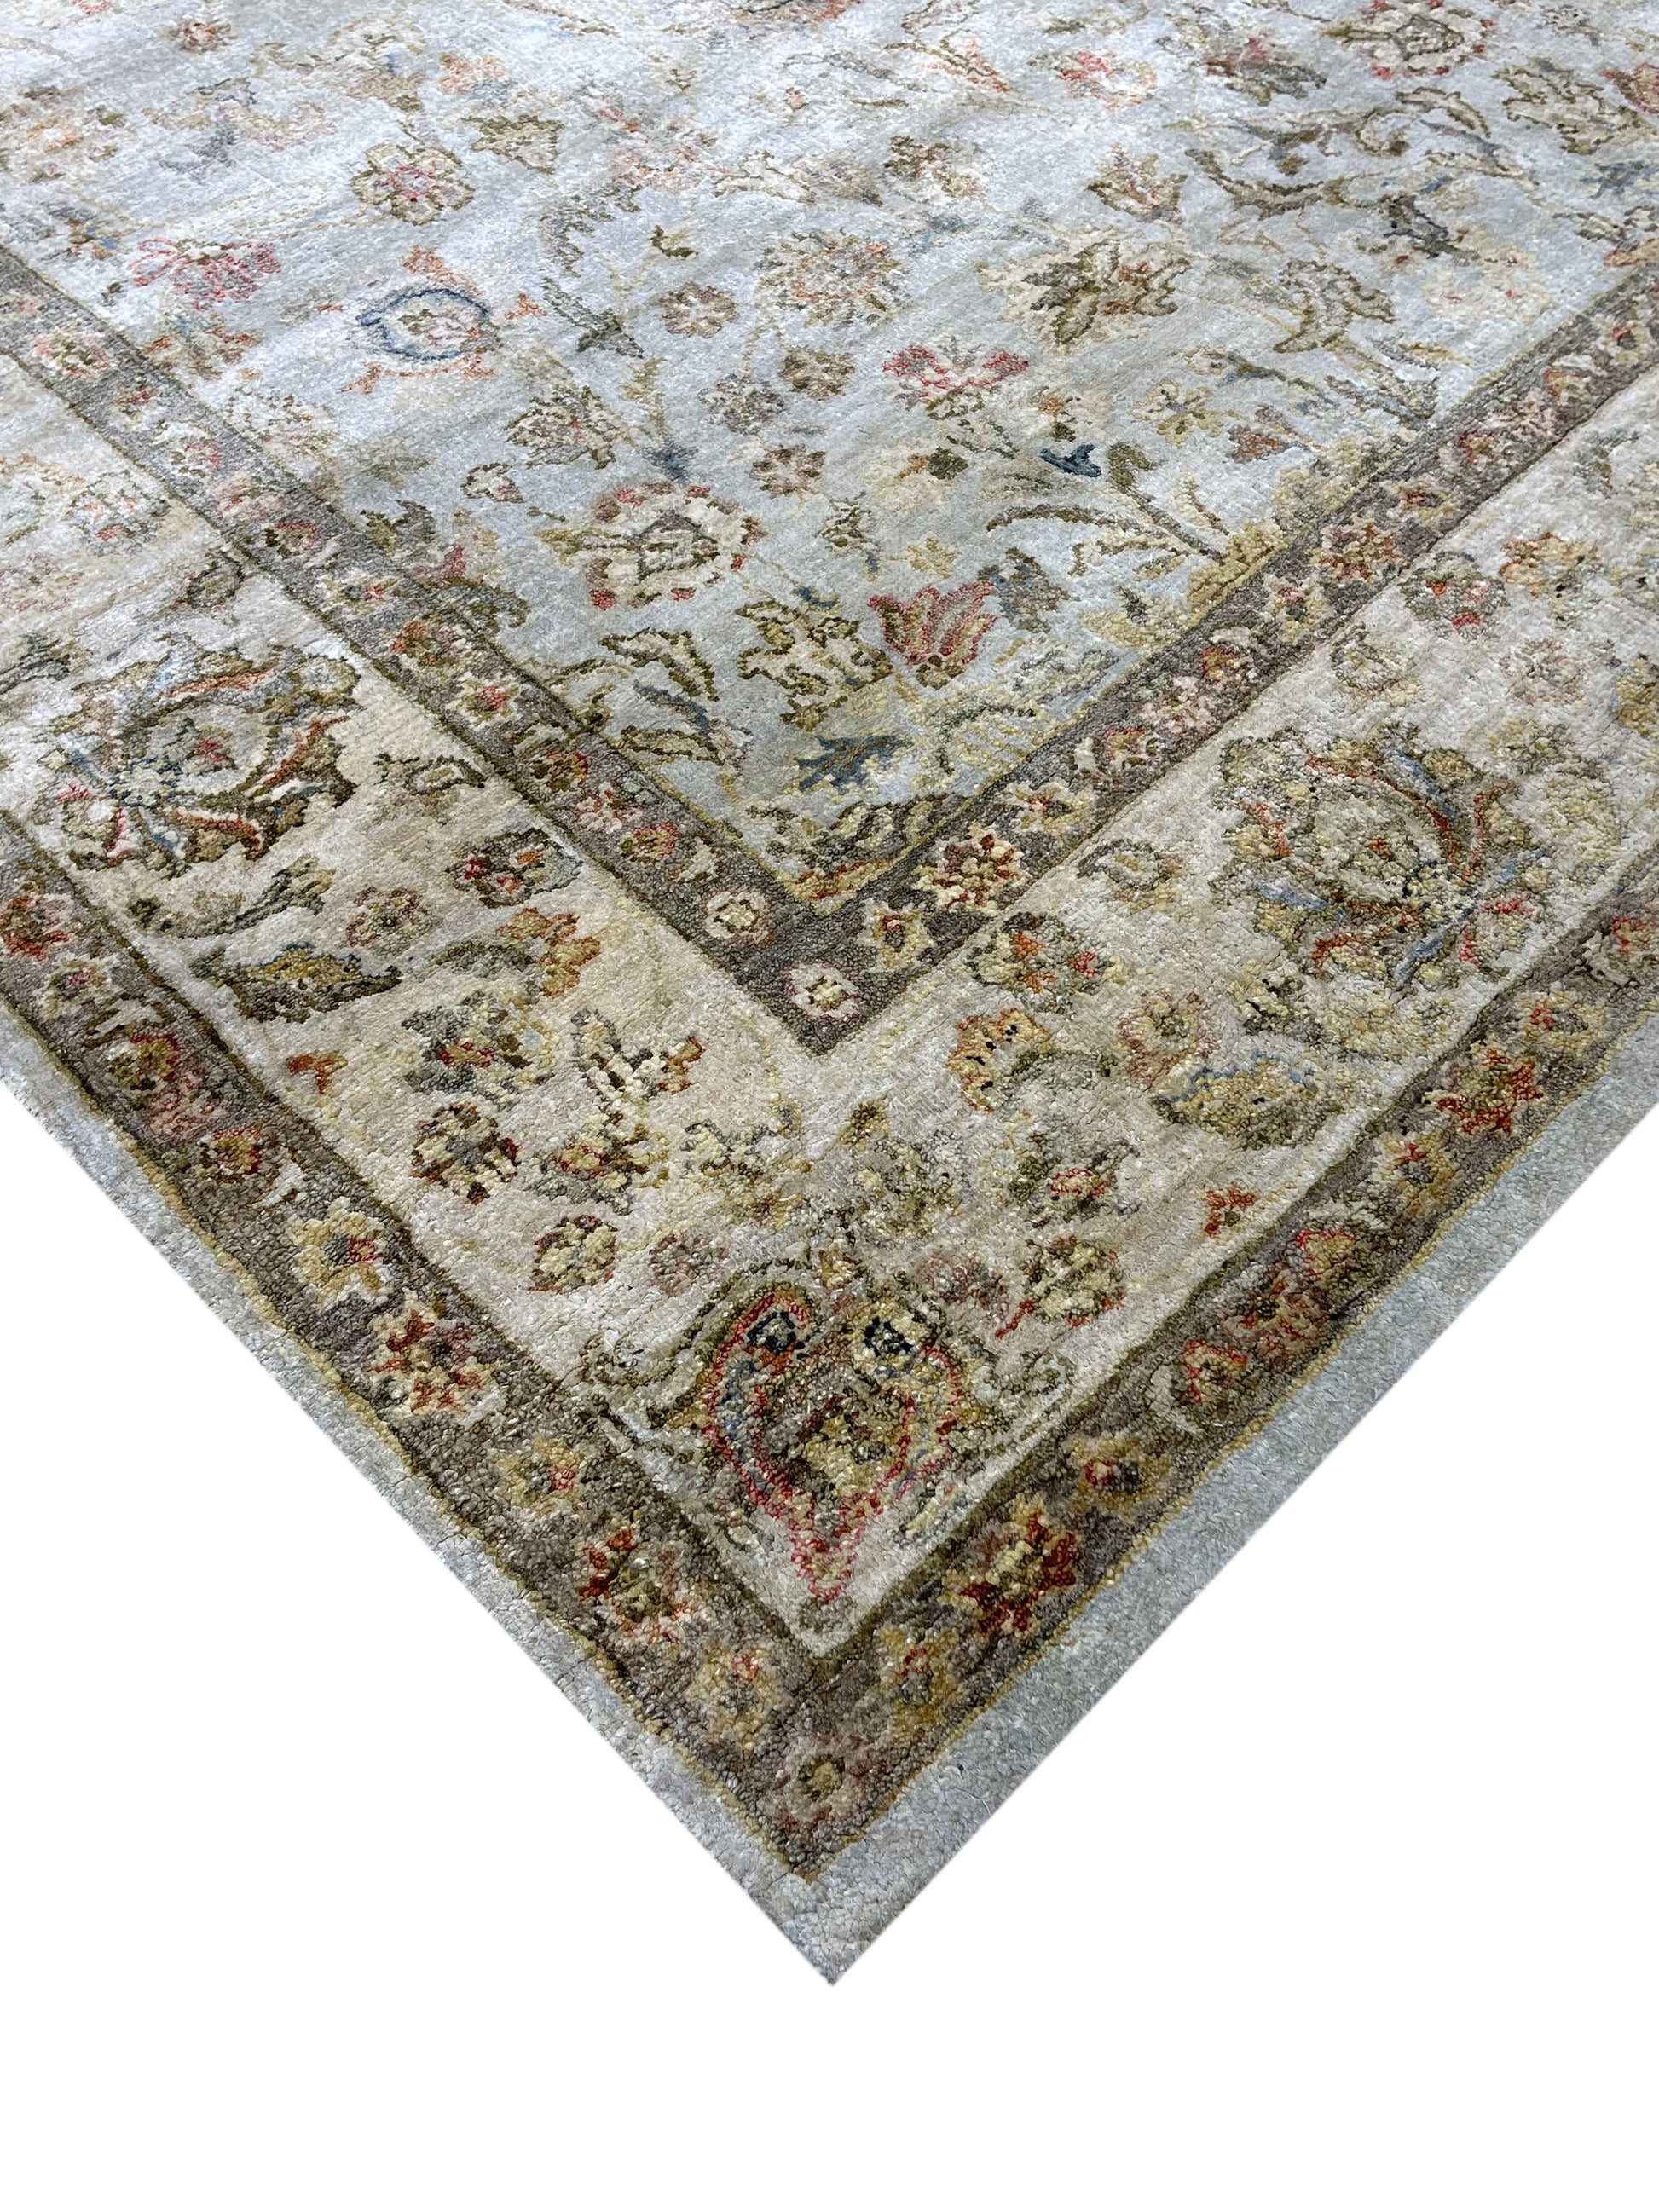 Get trendy with Silver Ivory Pure Silk Contemporary Handknotted Area Rug 6.0x9.0ft 183x274Cms - Contemporary Rugs available at Jaipur Oriental Rugs. Grab yours for $3880.00 today!